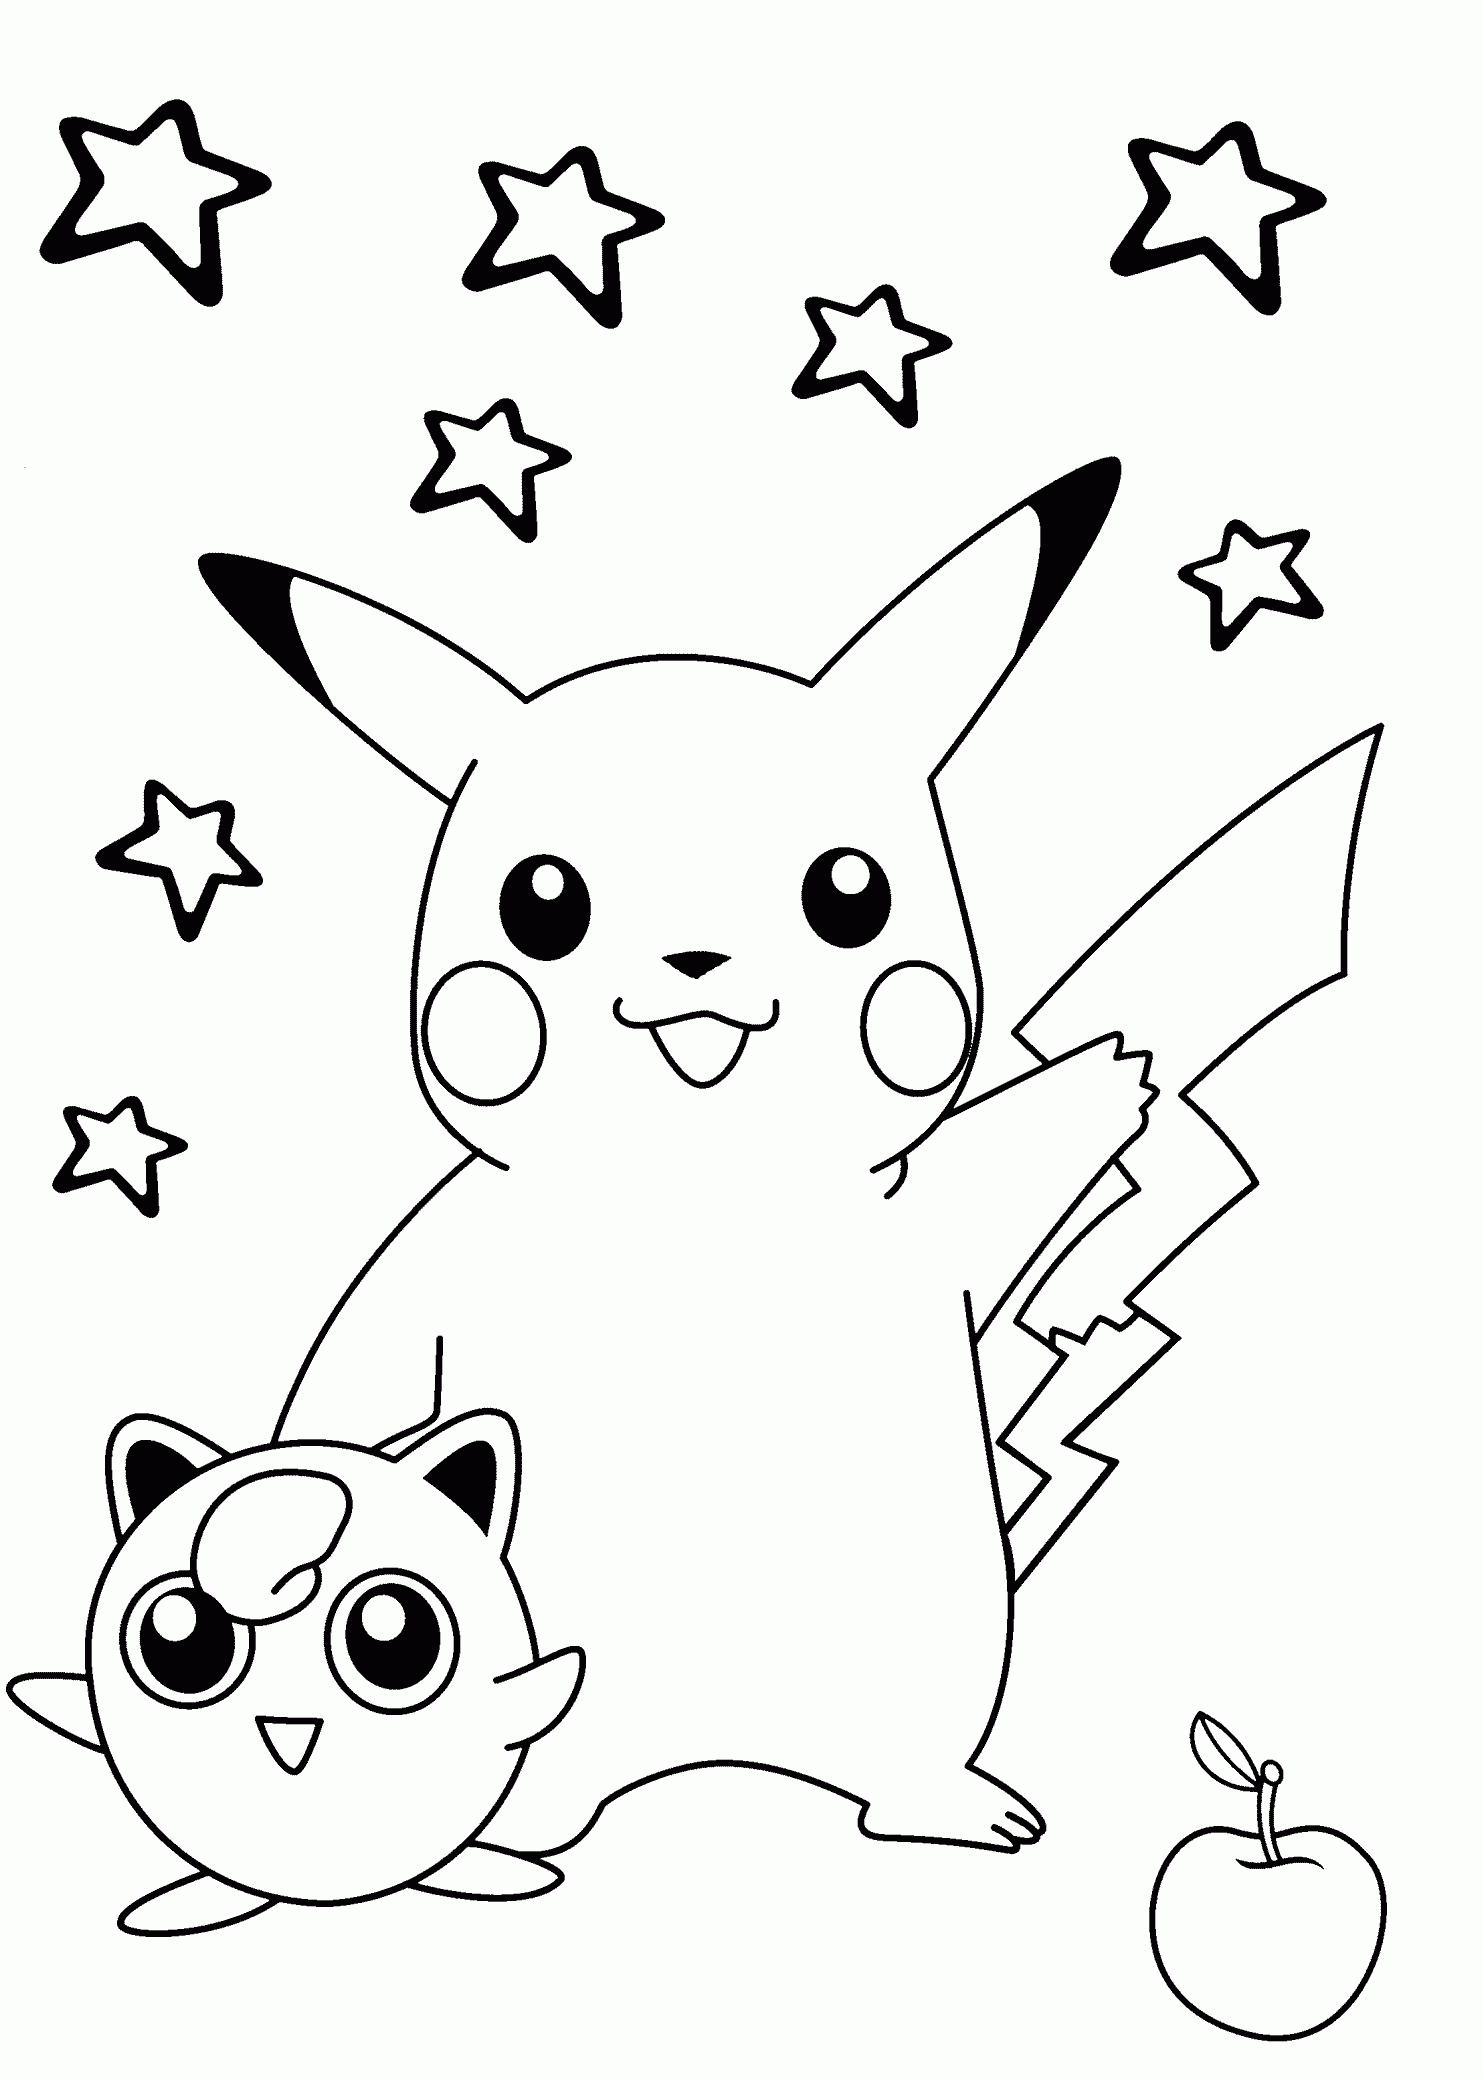 Smiling Pokemon Coloring Pages For Kids, Printable Free | Scanncut - Free Printable Coloring Pages For Kids